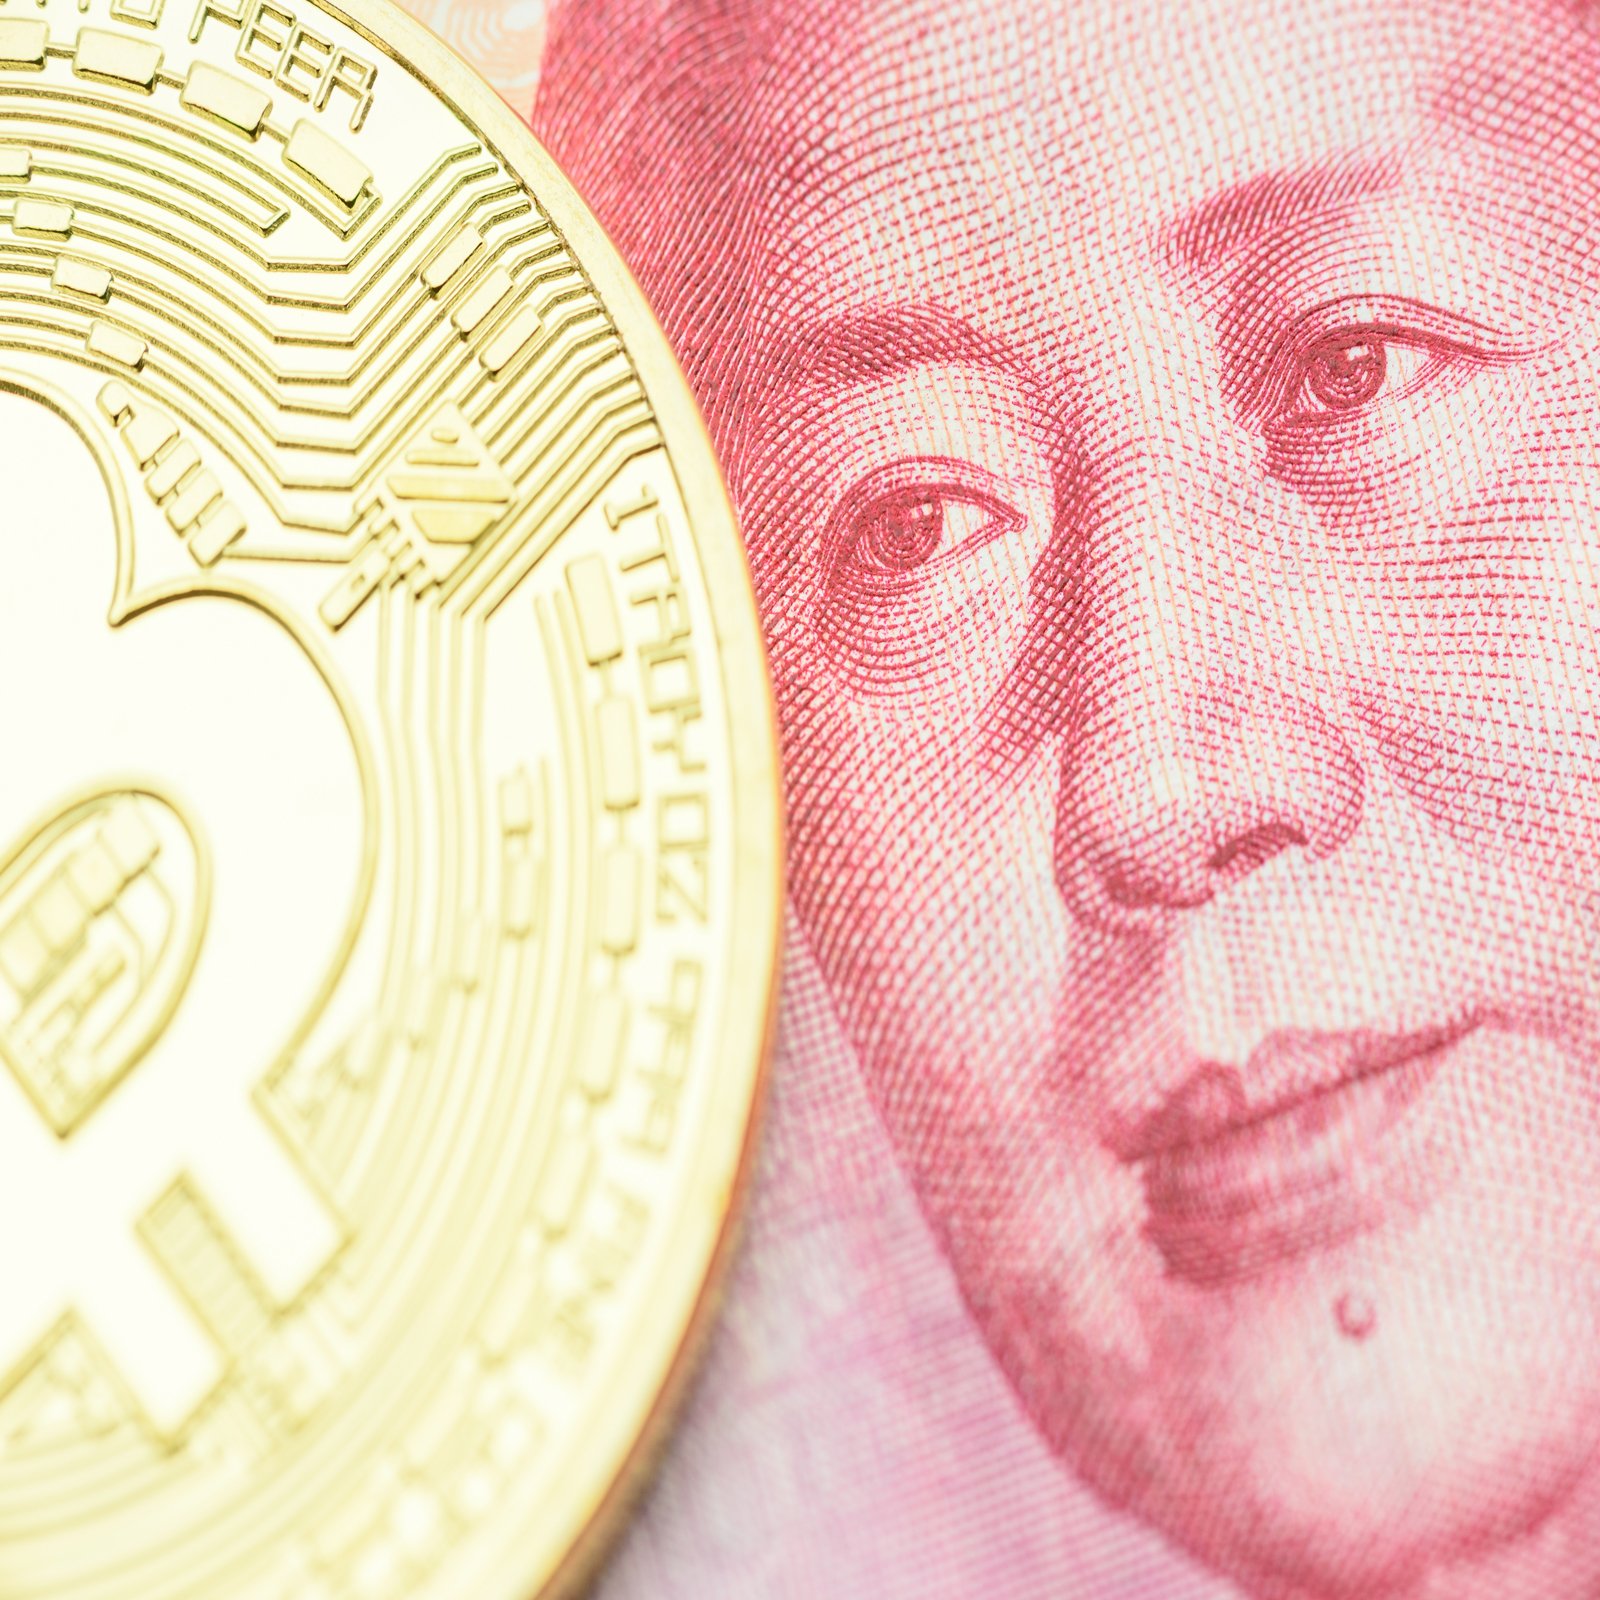 BTCC Founder Positive the PBOC Will Remove China's Exchange Ban